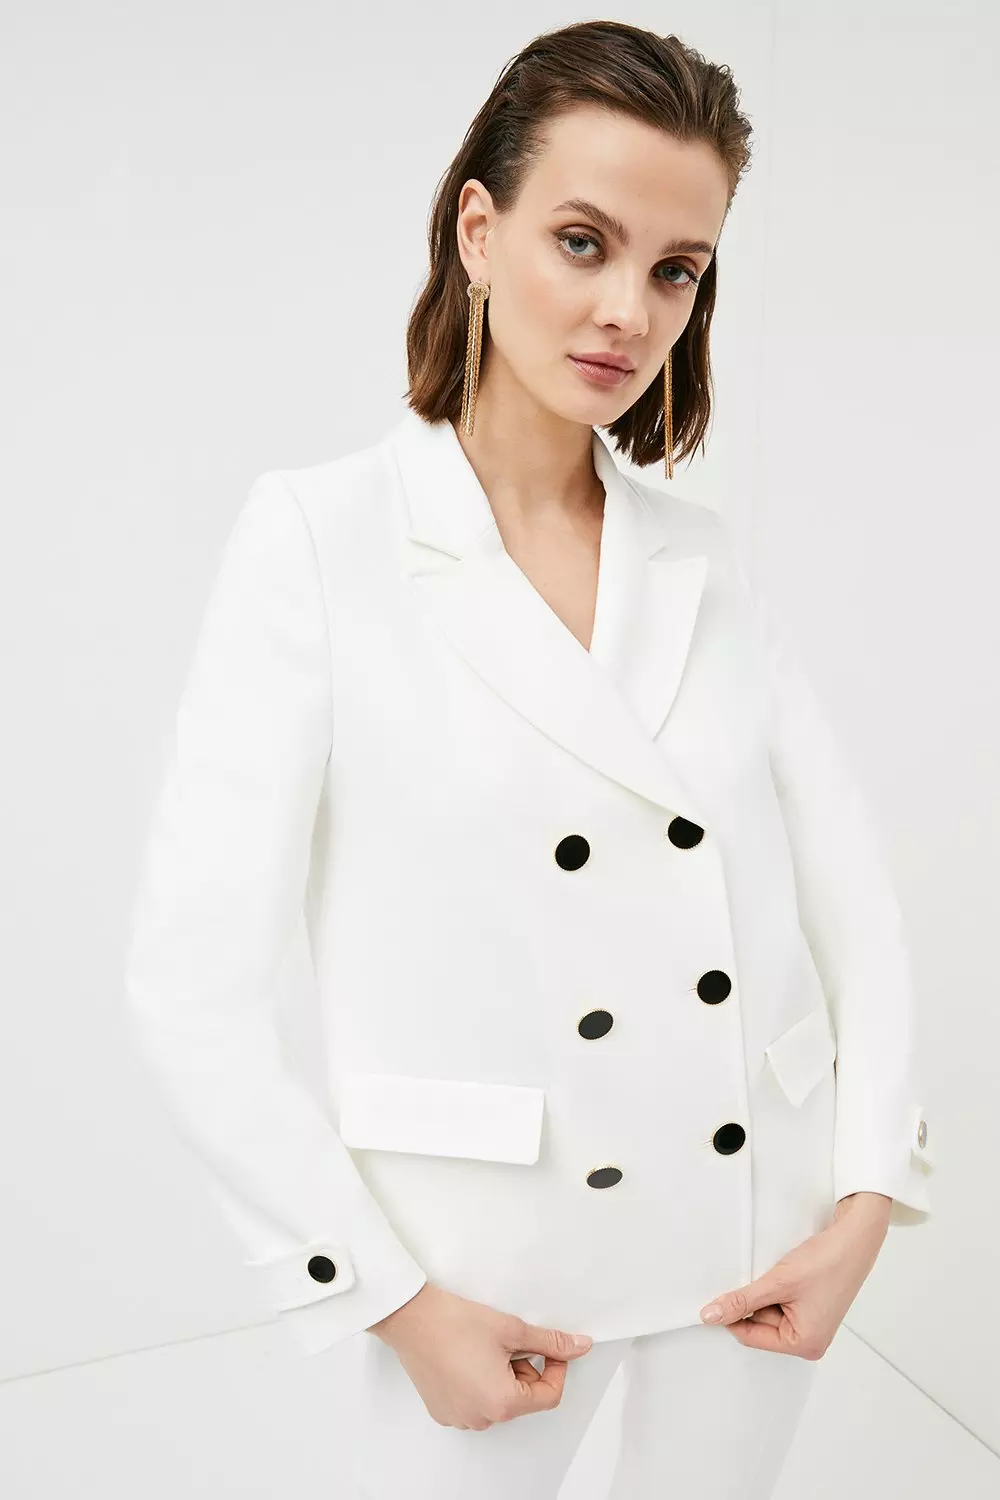 Ivory Women's Suit Dress Double Breasted Long Jacket Mother of the